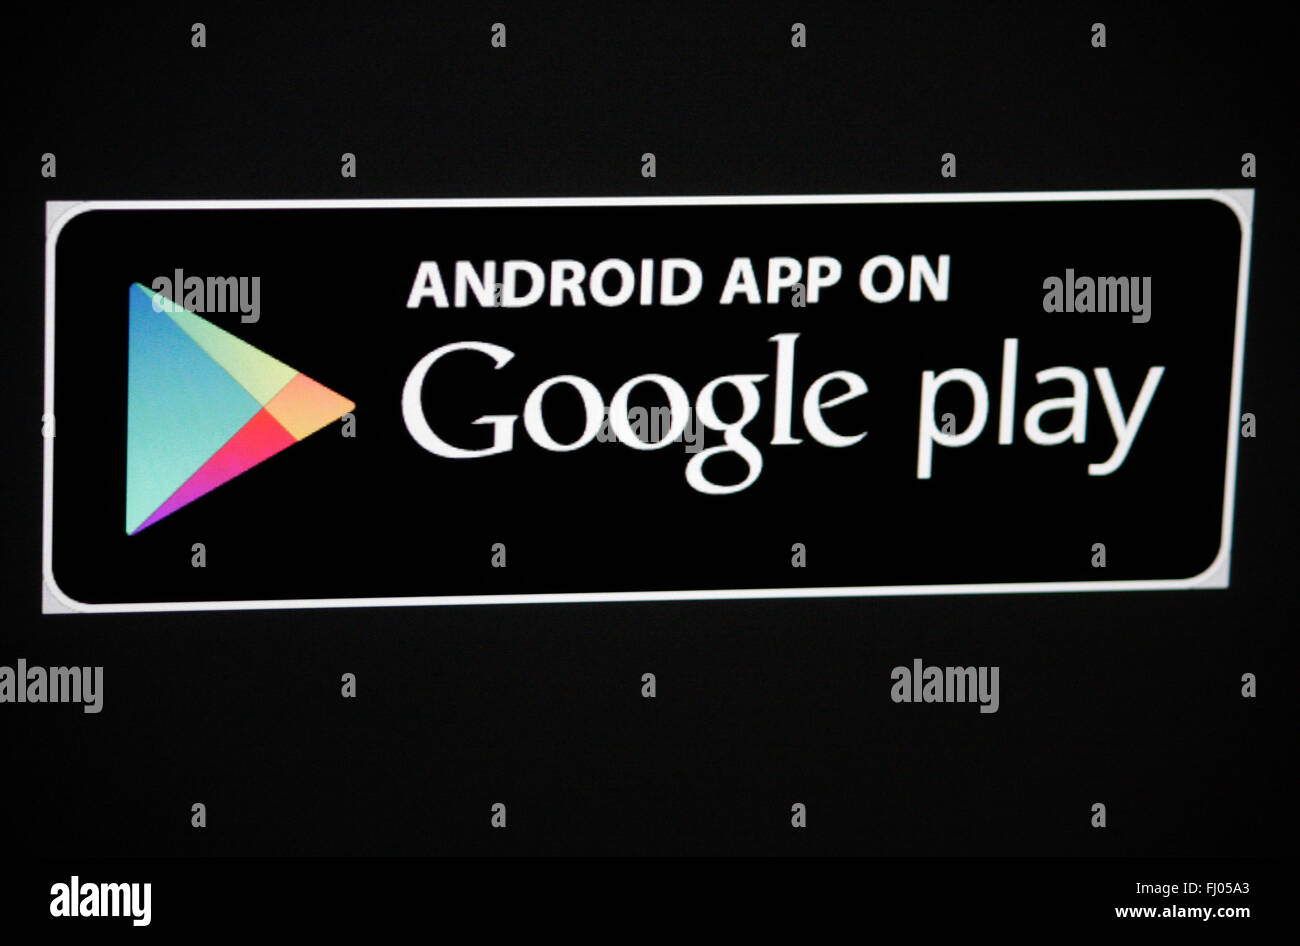 Google-play-games_1 on Paper Texture Editorial Photo - Image of